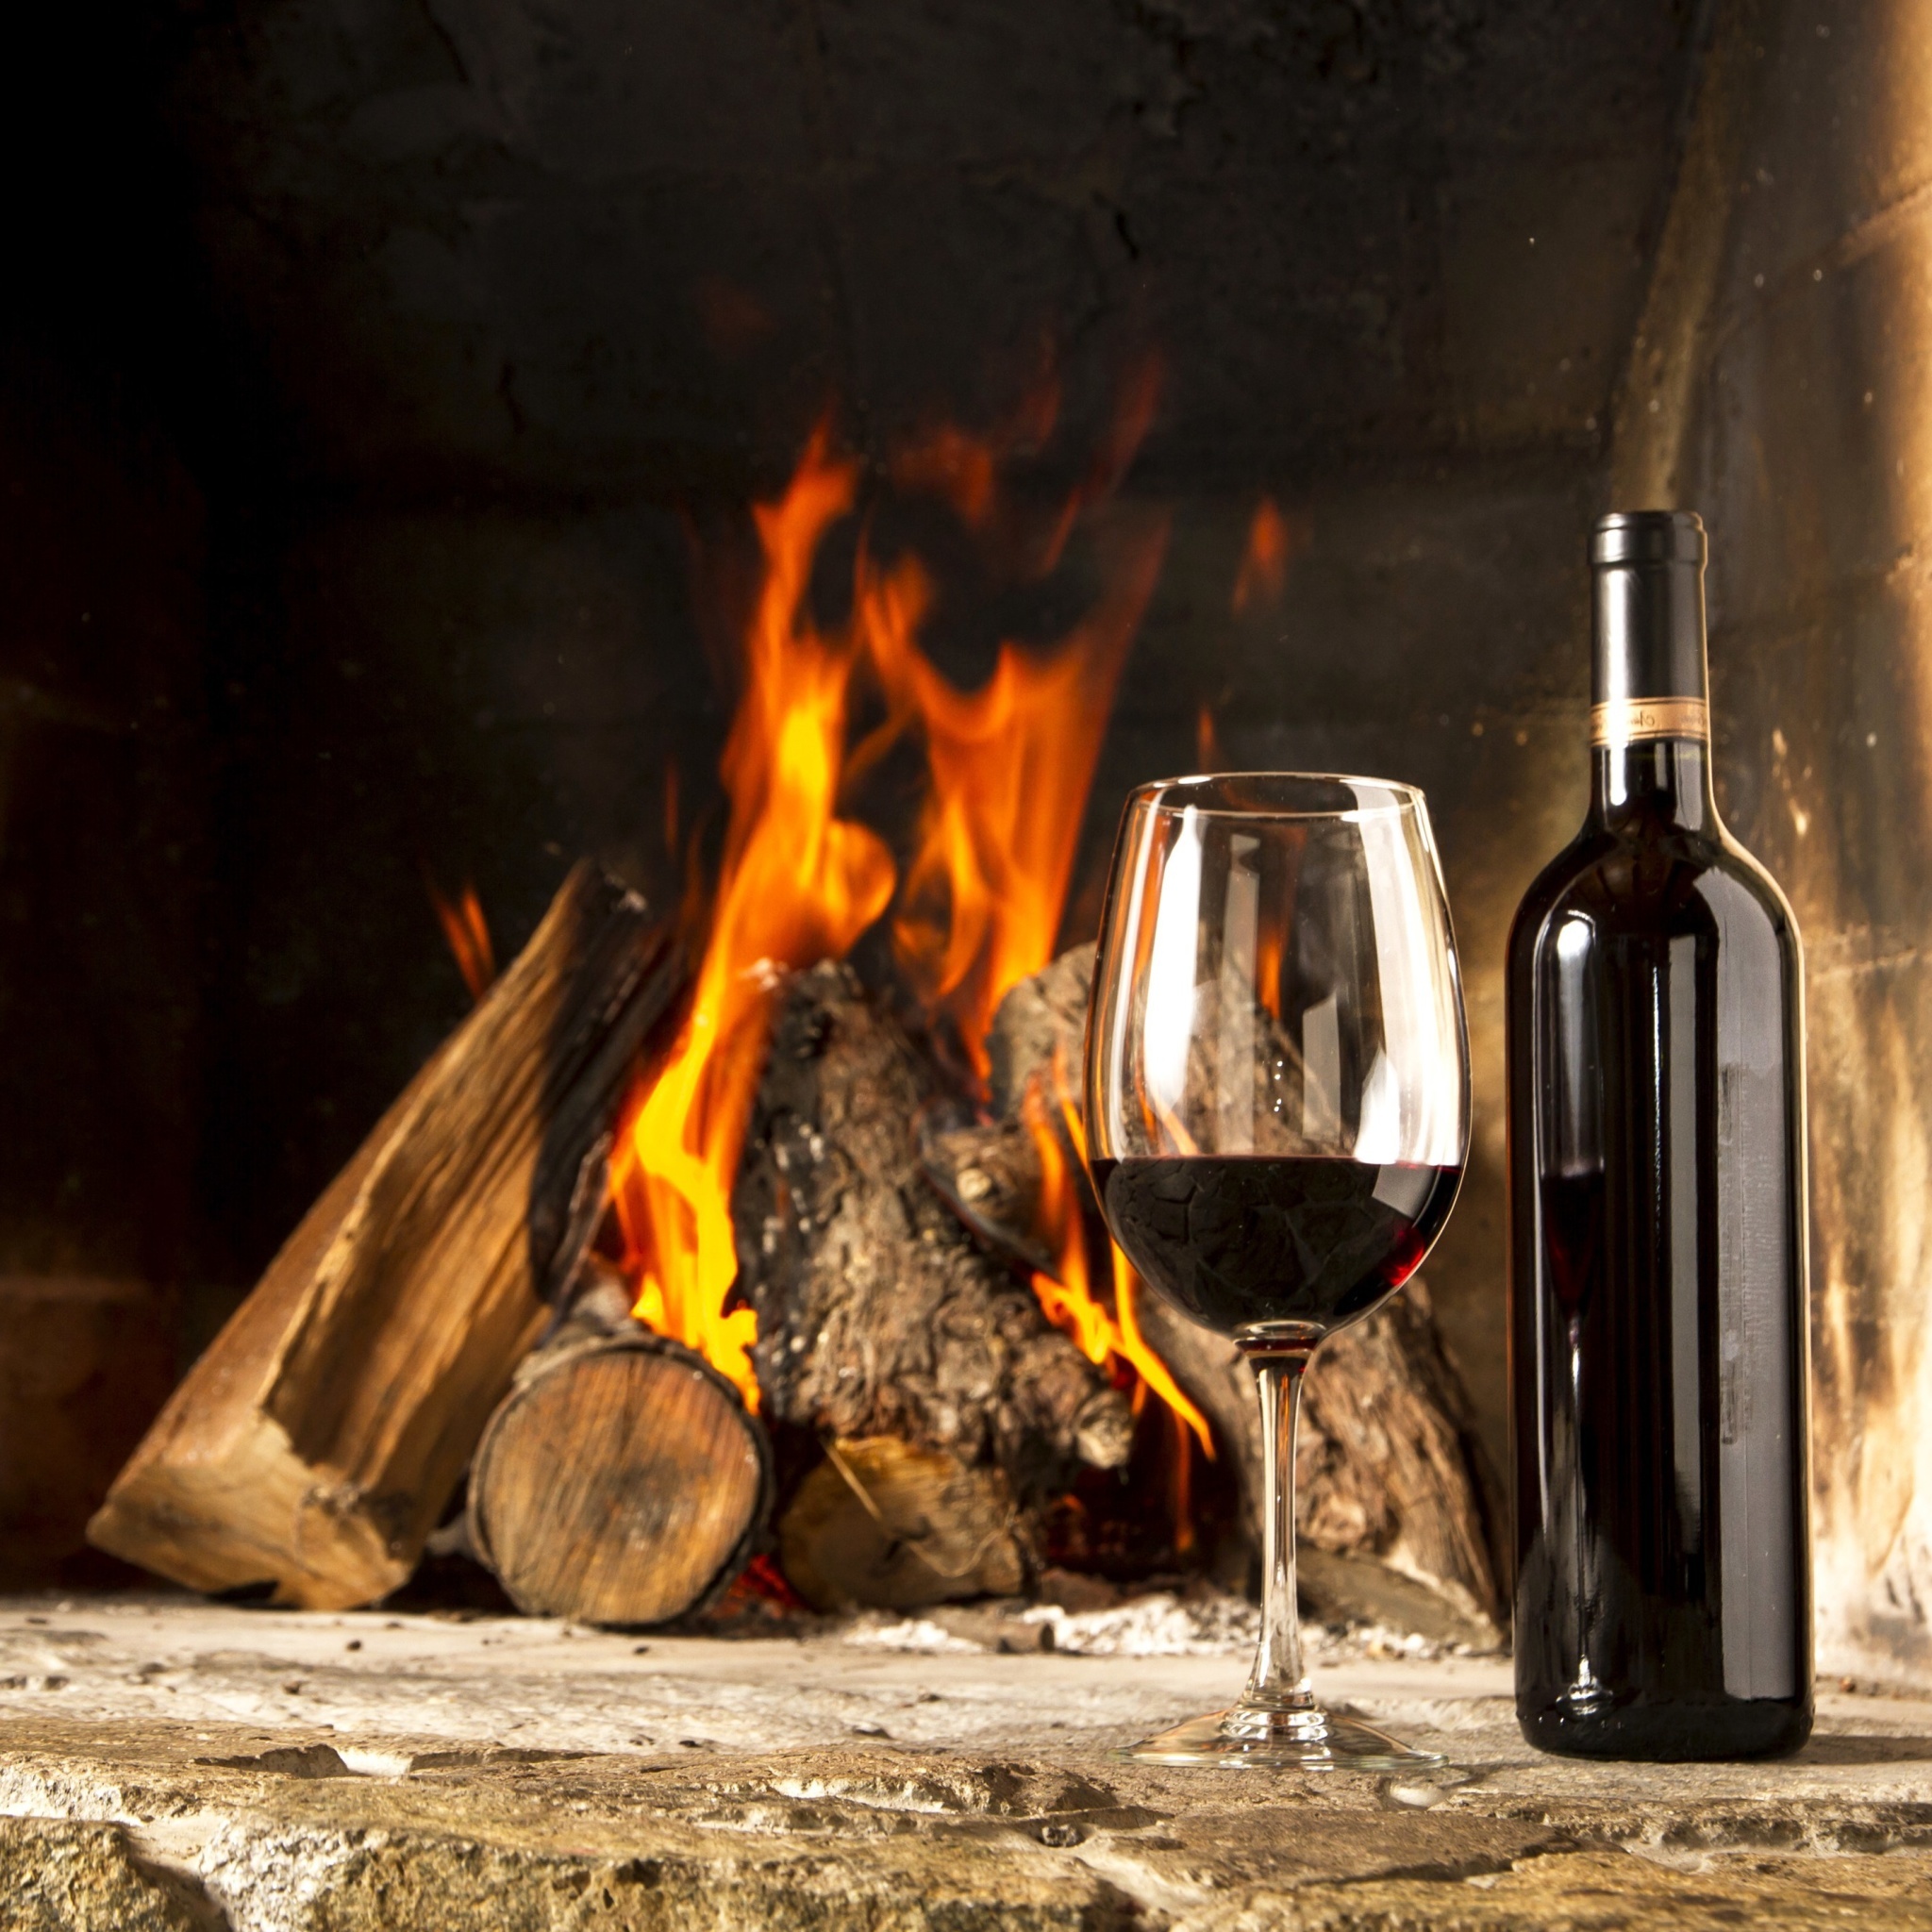 Das Wine and fireplace Wallpaper 2048x2048